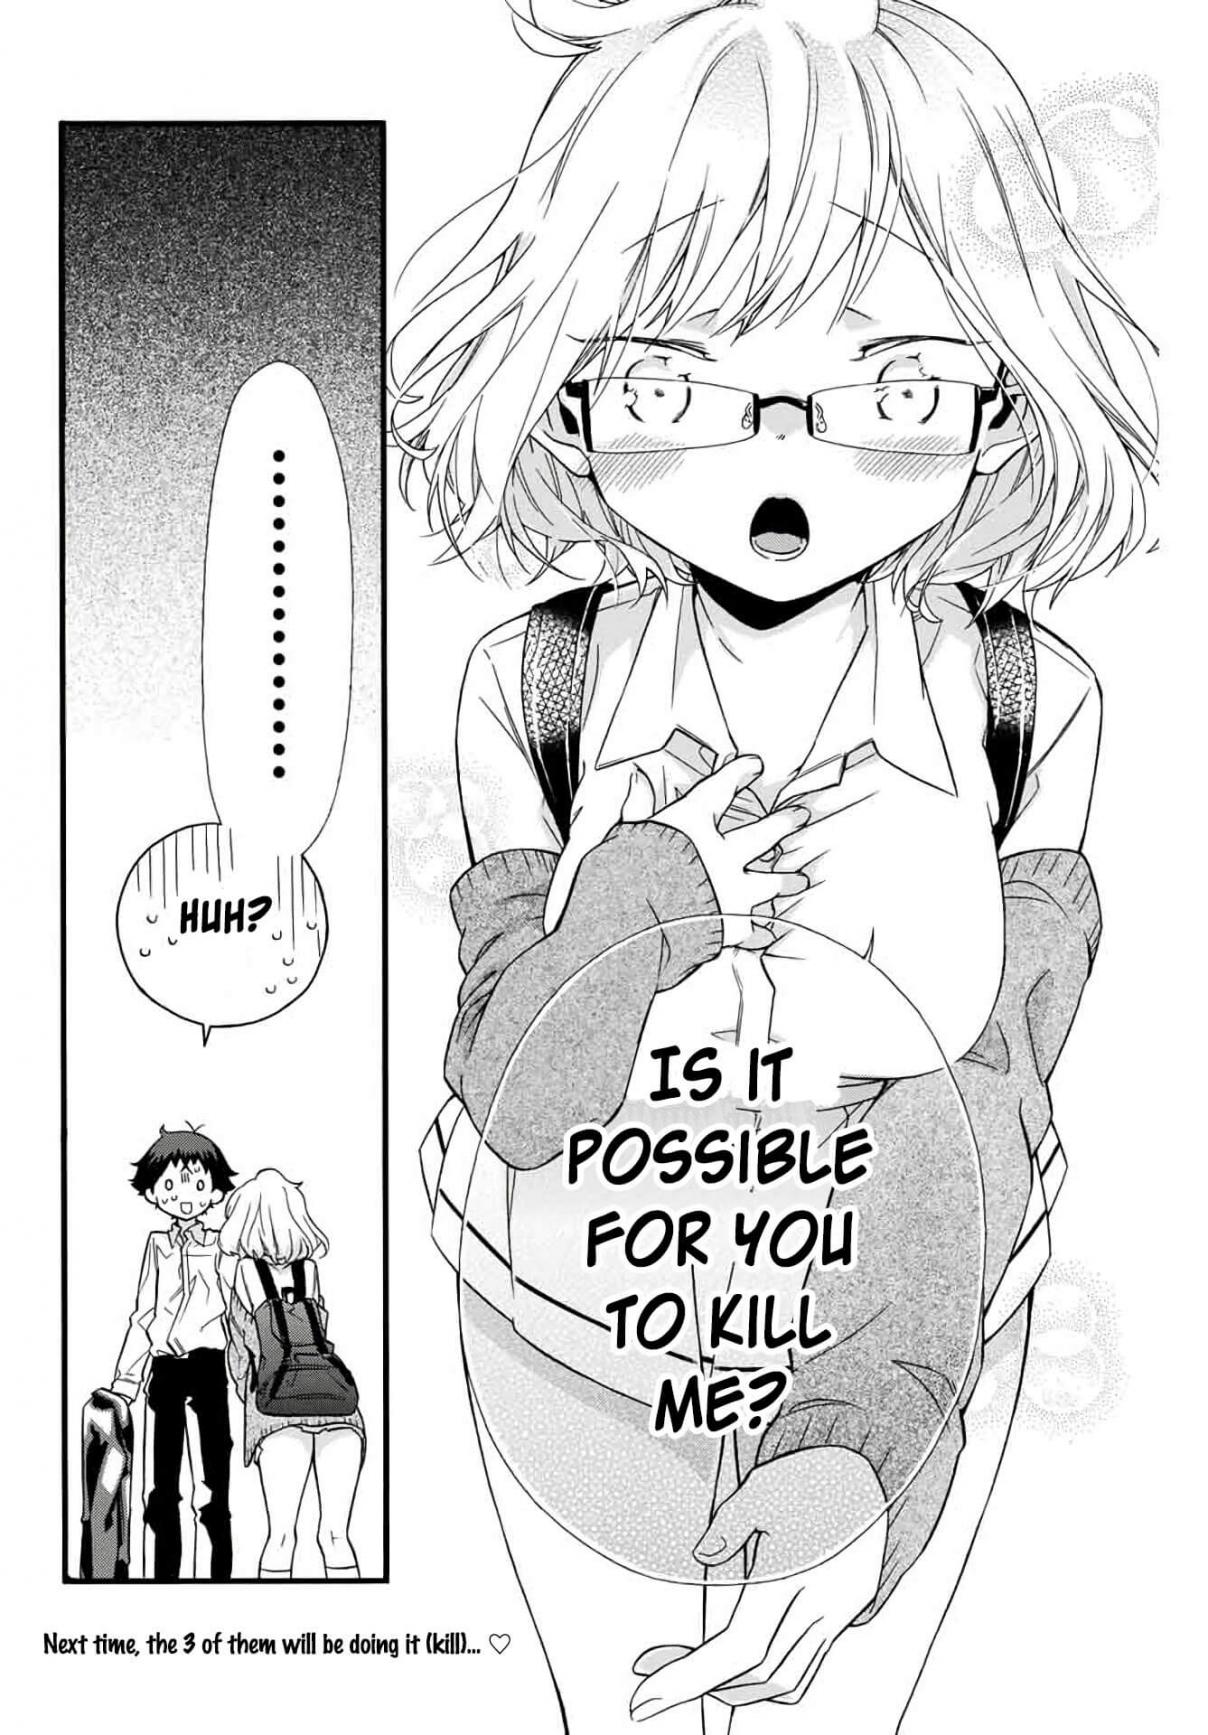 Even If I Die With Miss Asanami, I Want to Cum Ch. 2 Electrocution And The Two Who Are Drenched